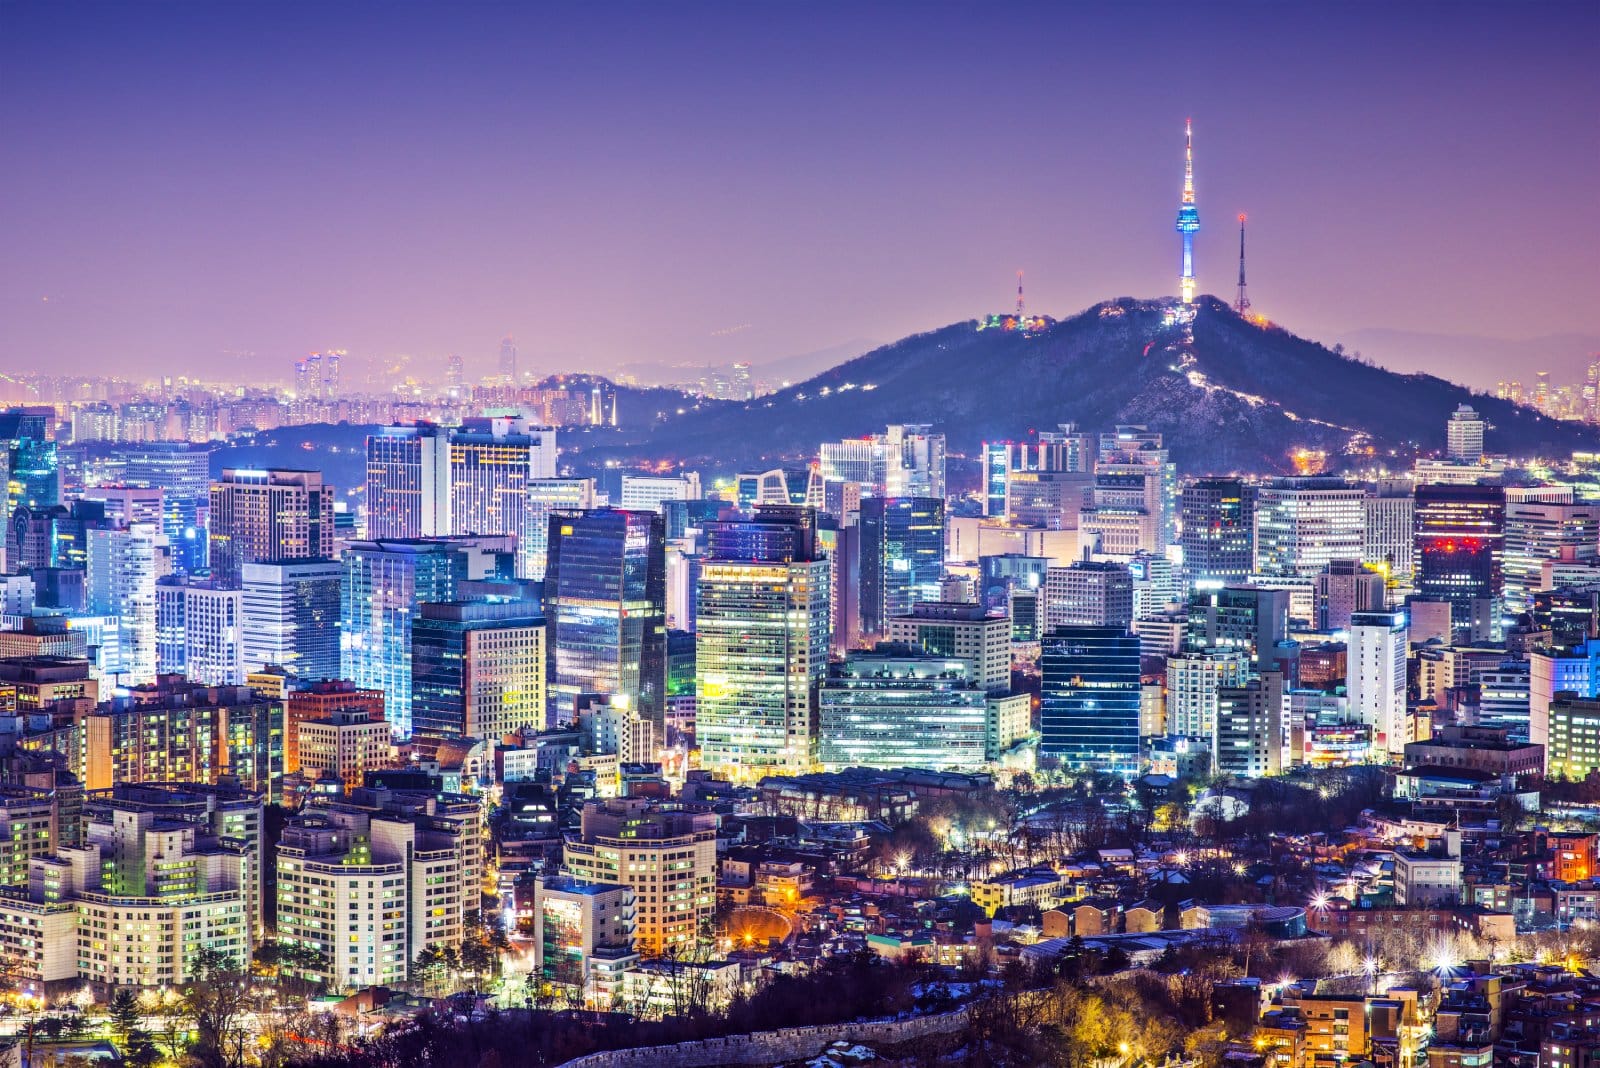 <p class="wp-caption-text">Image Credit: Shutterstock / ESB Professional</p>  <p><span>For those seeking a natural escape within the city, Inwangsan Mountain offers hiking trails with stunning views of Seoul. Known for its rocky terrain and shamanistic shrines, Inwangsan uniquely blends natural beauty and cultural significance. The hike to the summit is relatively easy, making it accessible for most fitness levels. It also rewards hikers with panoramic views of the city’s skyline, including landmarks like N Seoul Tower and Gyeongbokgung Palace.</span></p>